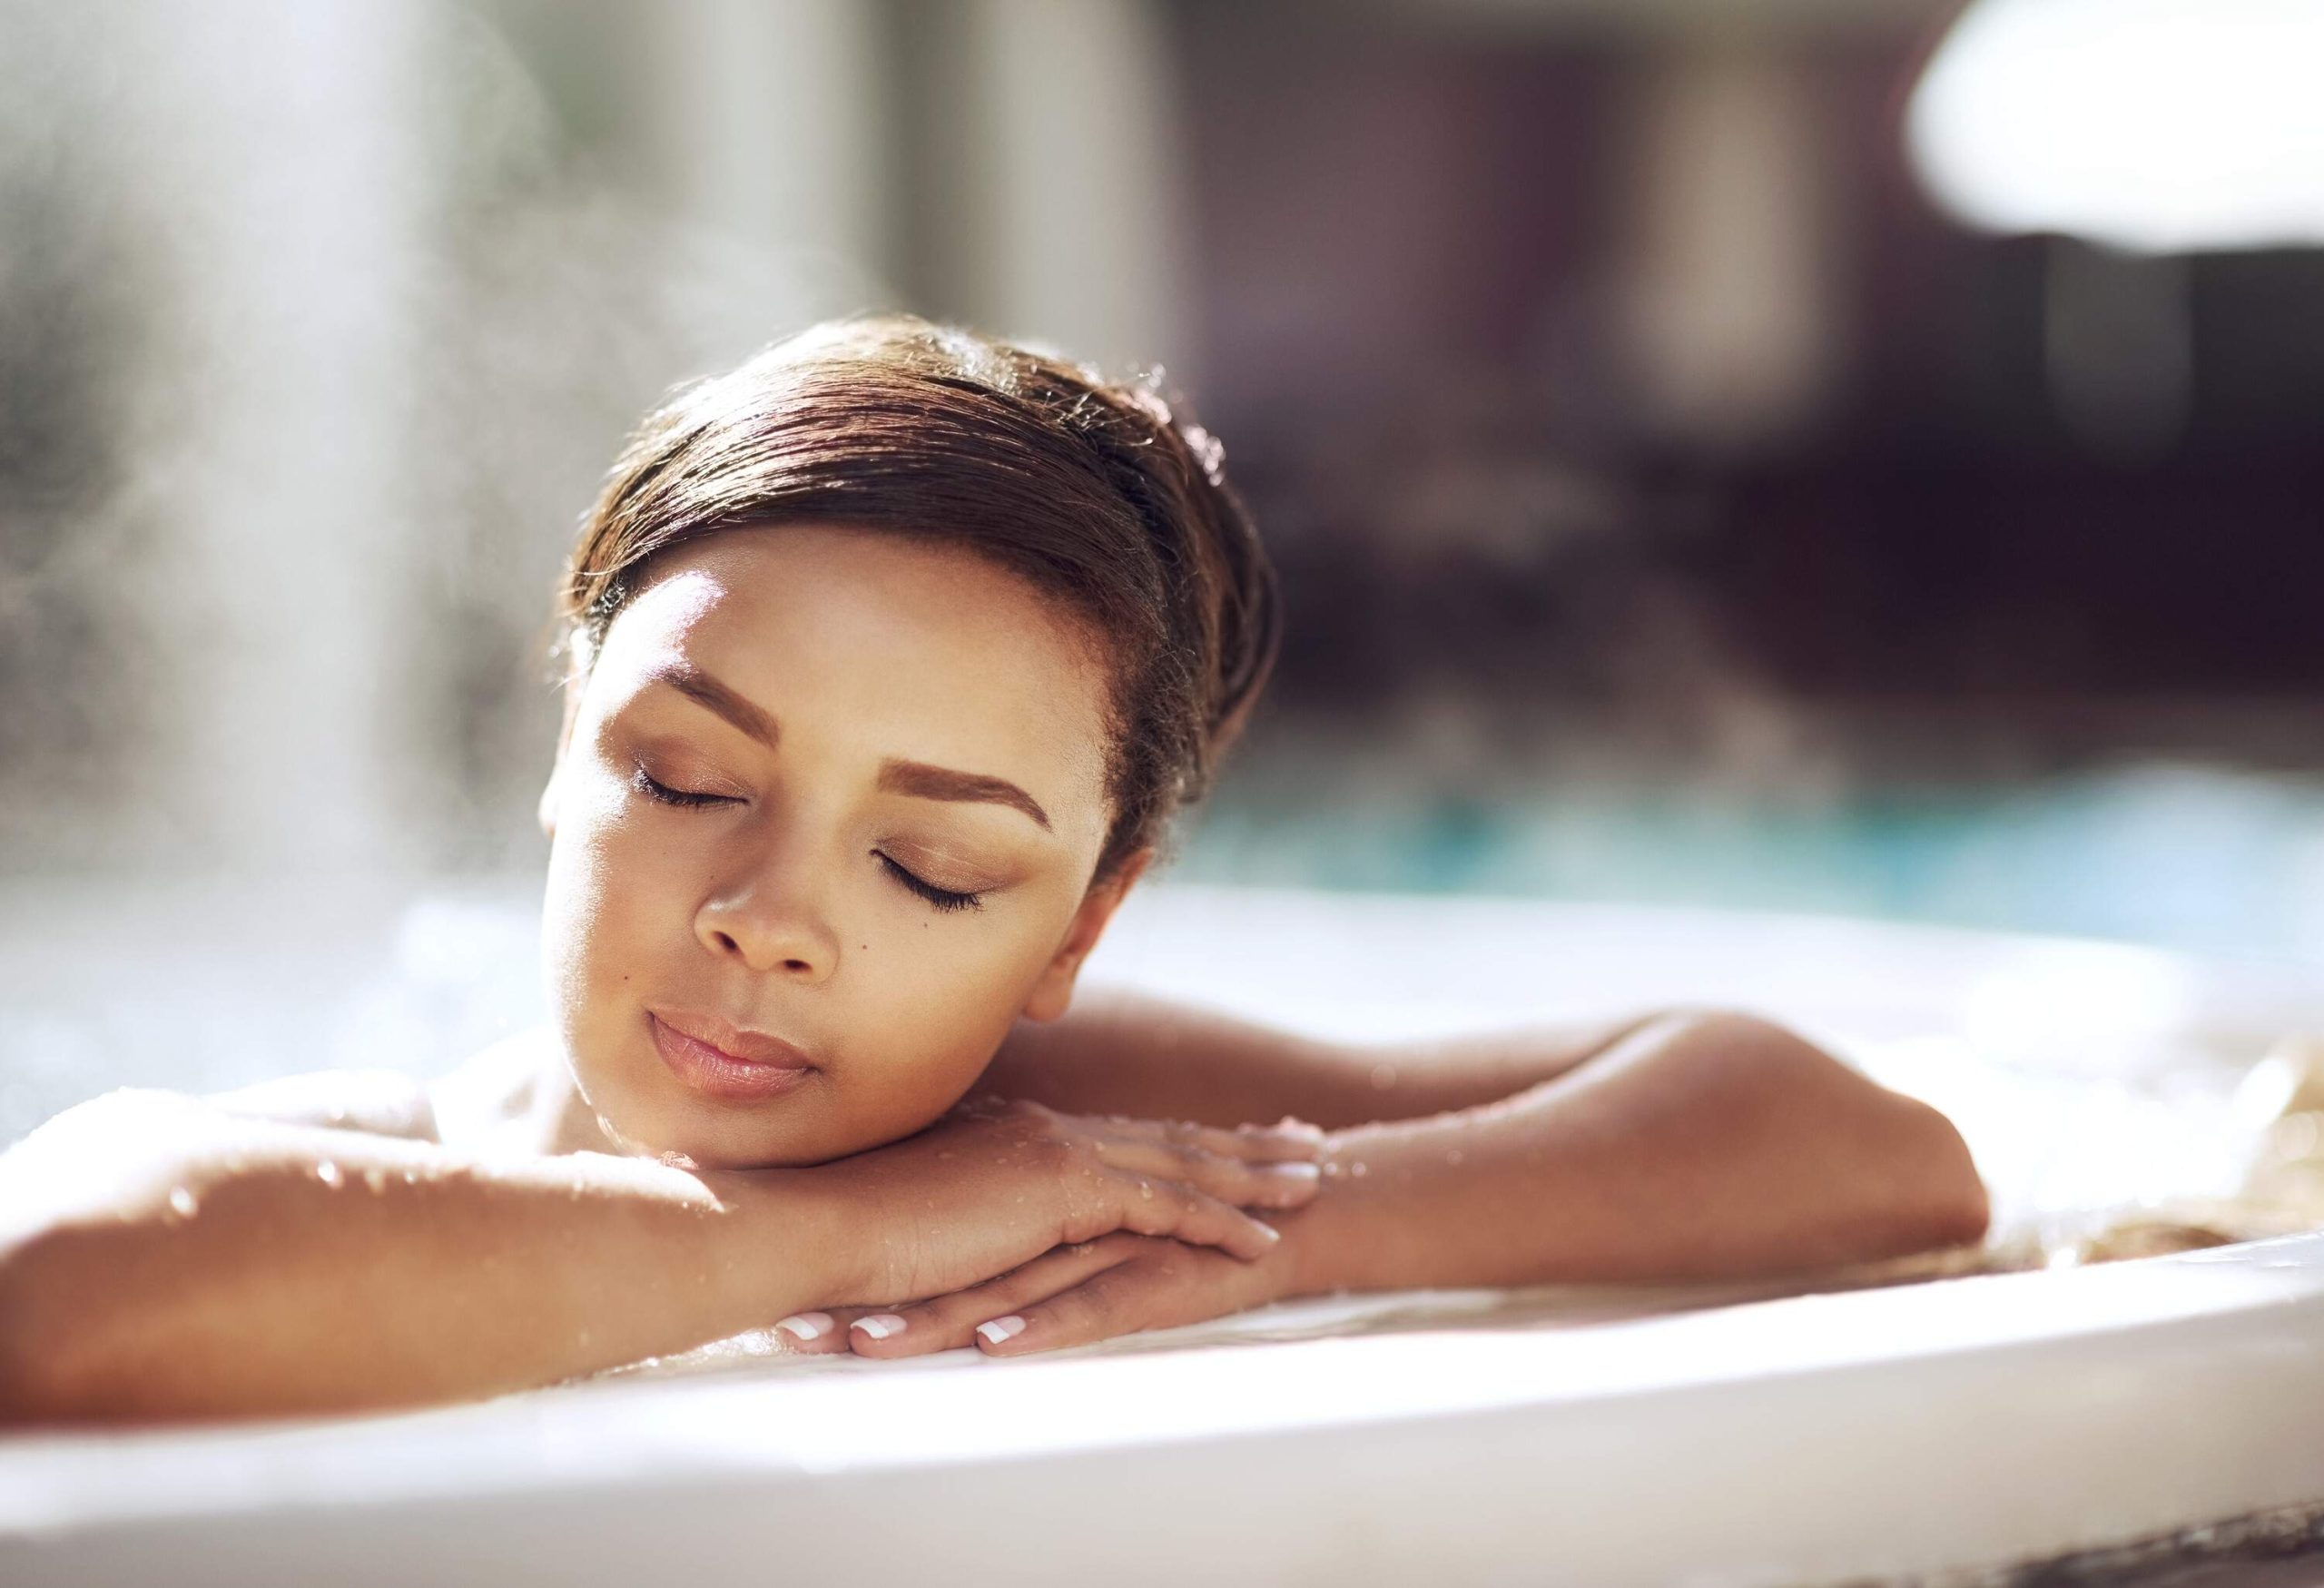 A woman relaxes in a hot tub with her eyes closed.